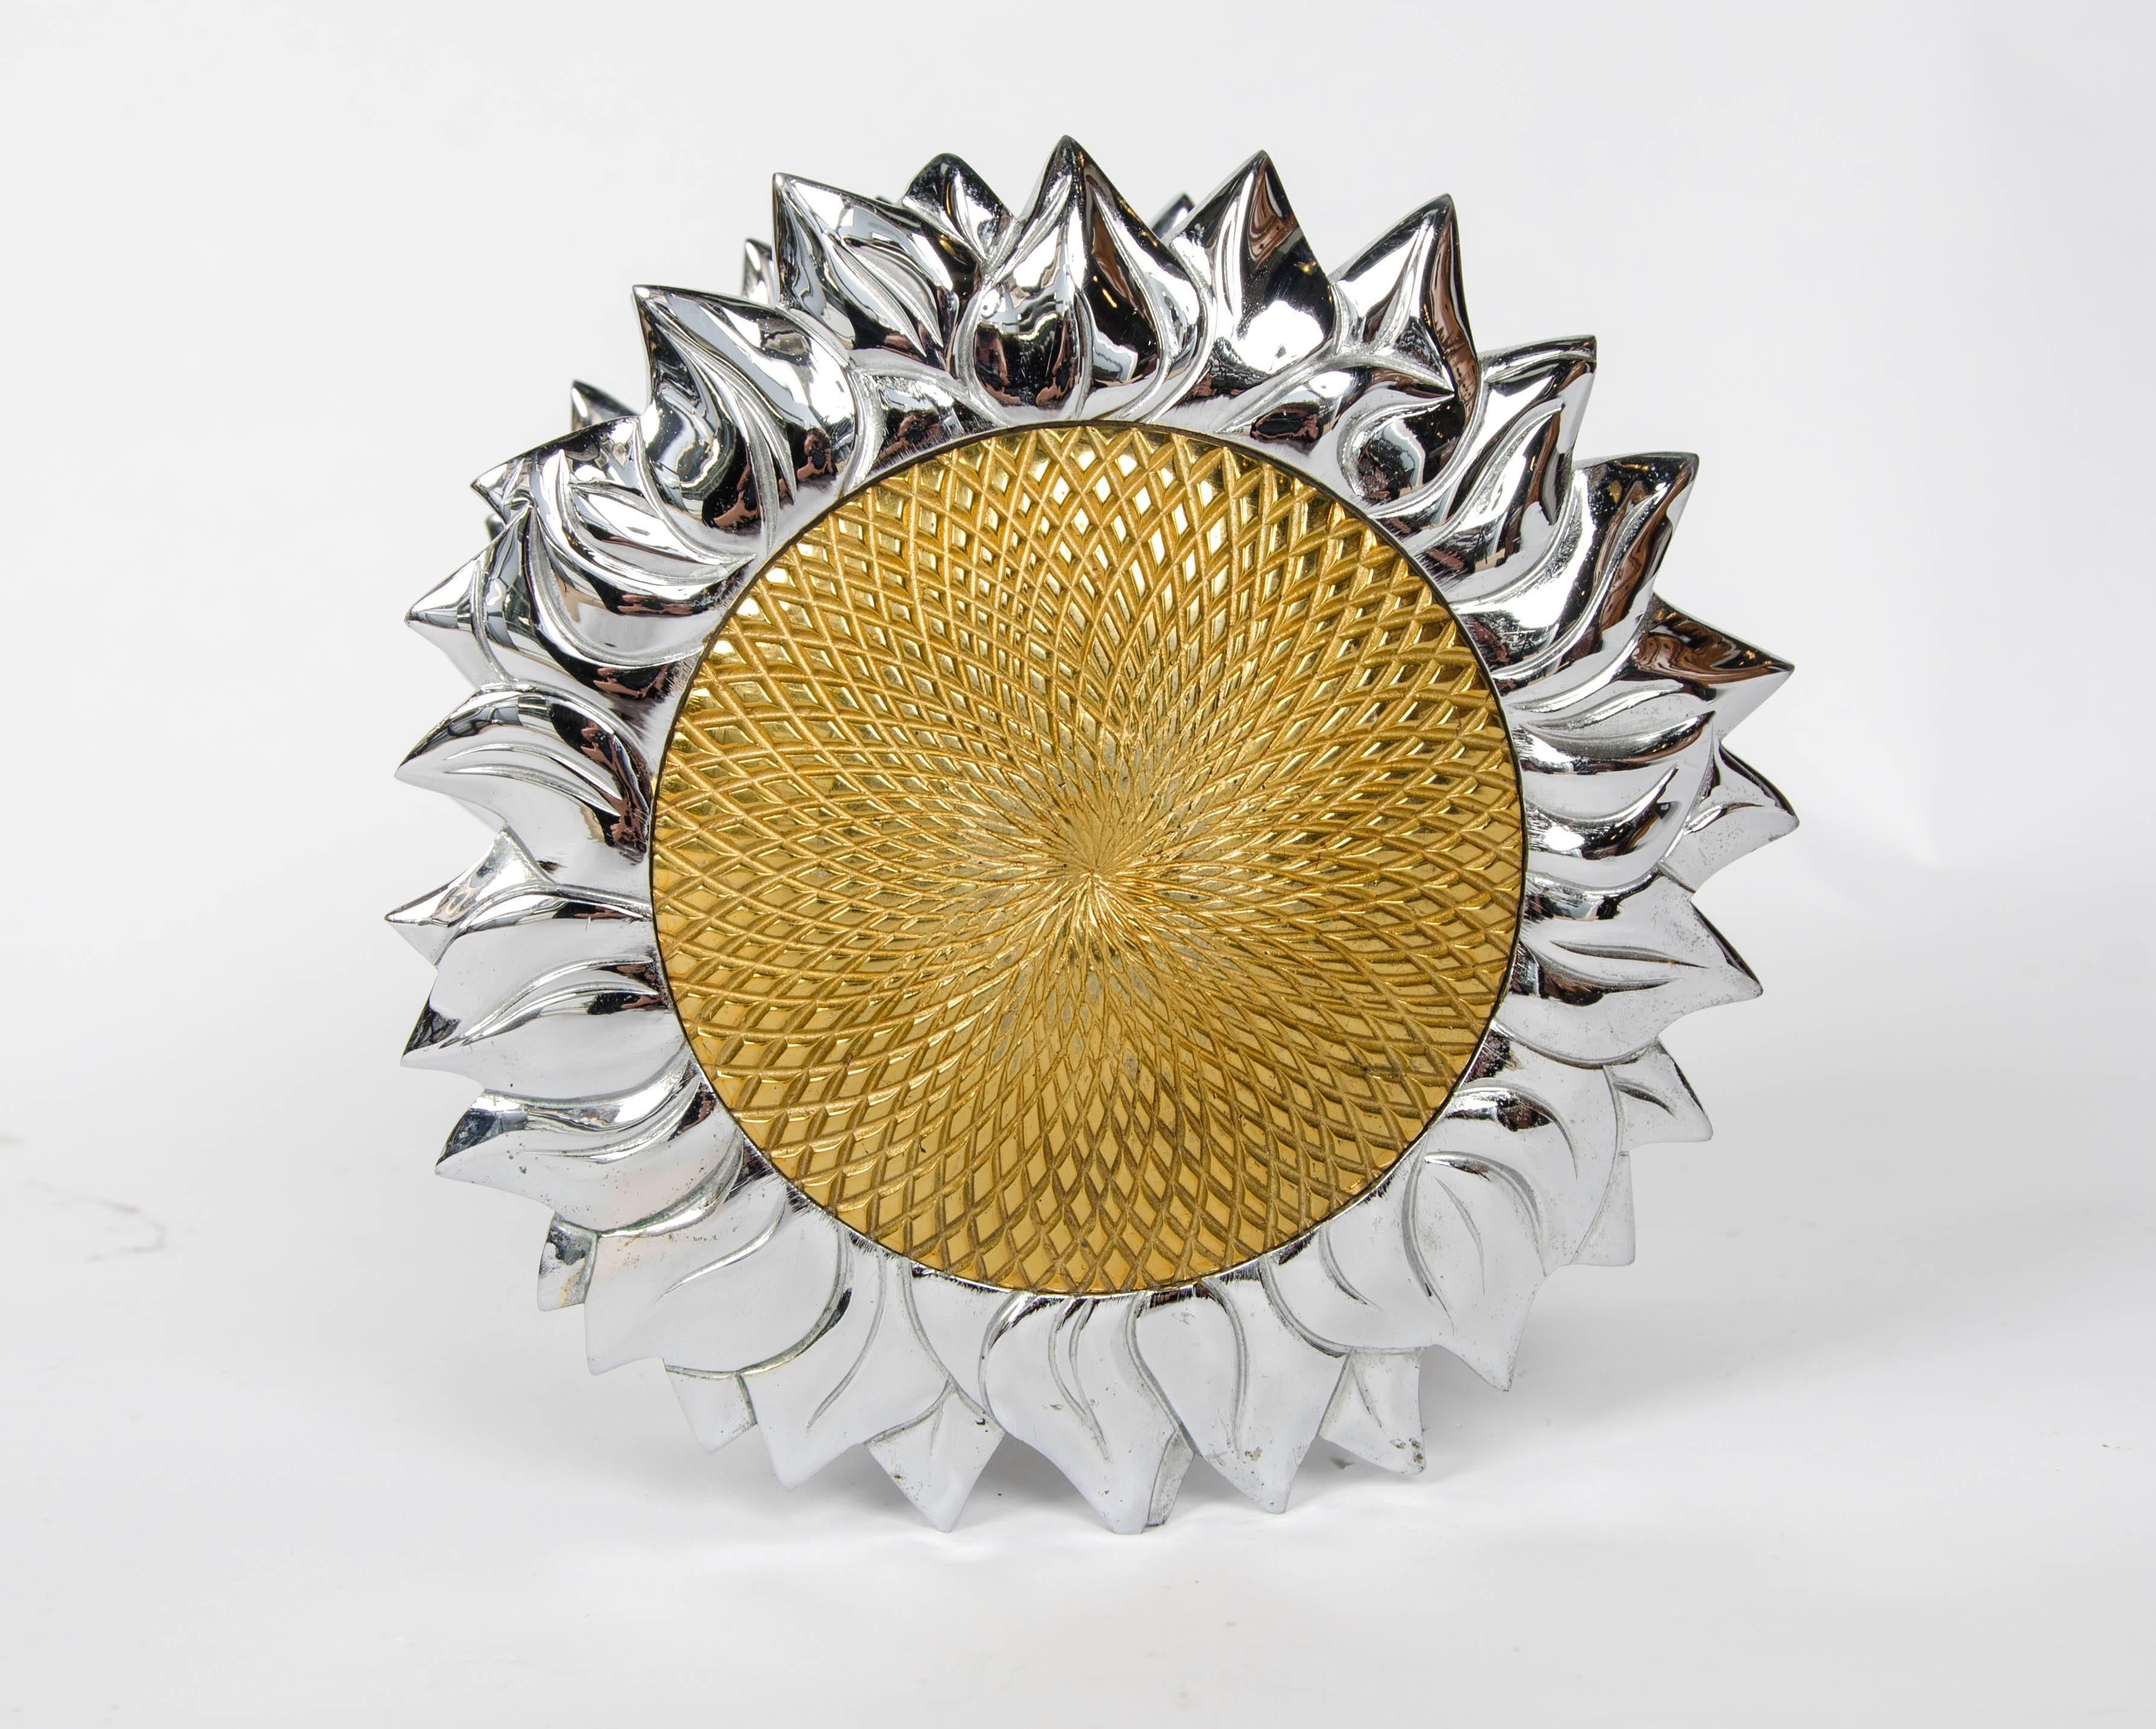 Fabulous quality cast bronze double sided sunflower shaped door handle designed by Chrystiane Charles - silvered and ormolu finish, beautiful crisp casting, circa 1970, France.

Provenance: The estate of Chrystiane Charles, possibly made for her